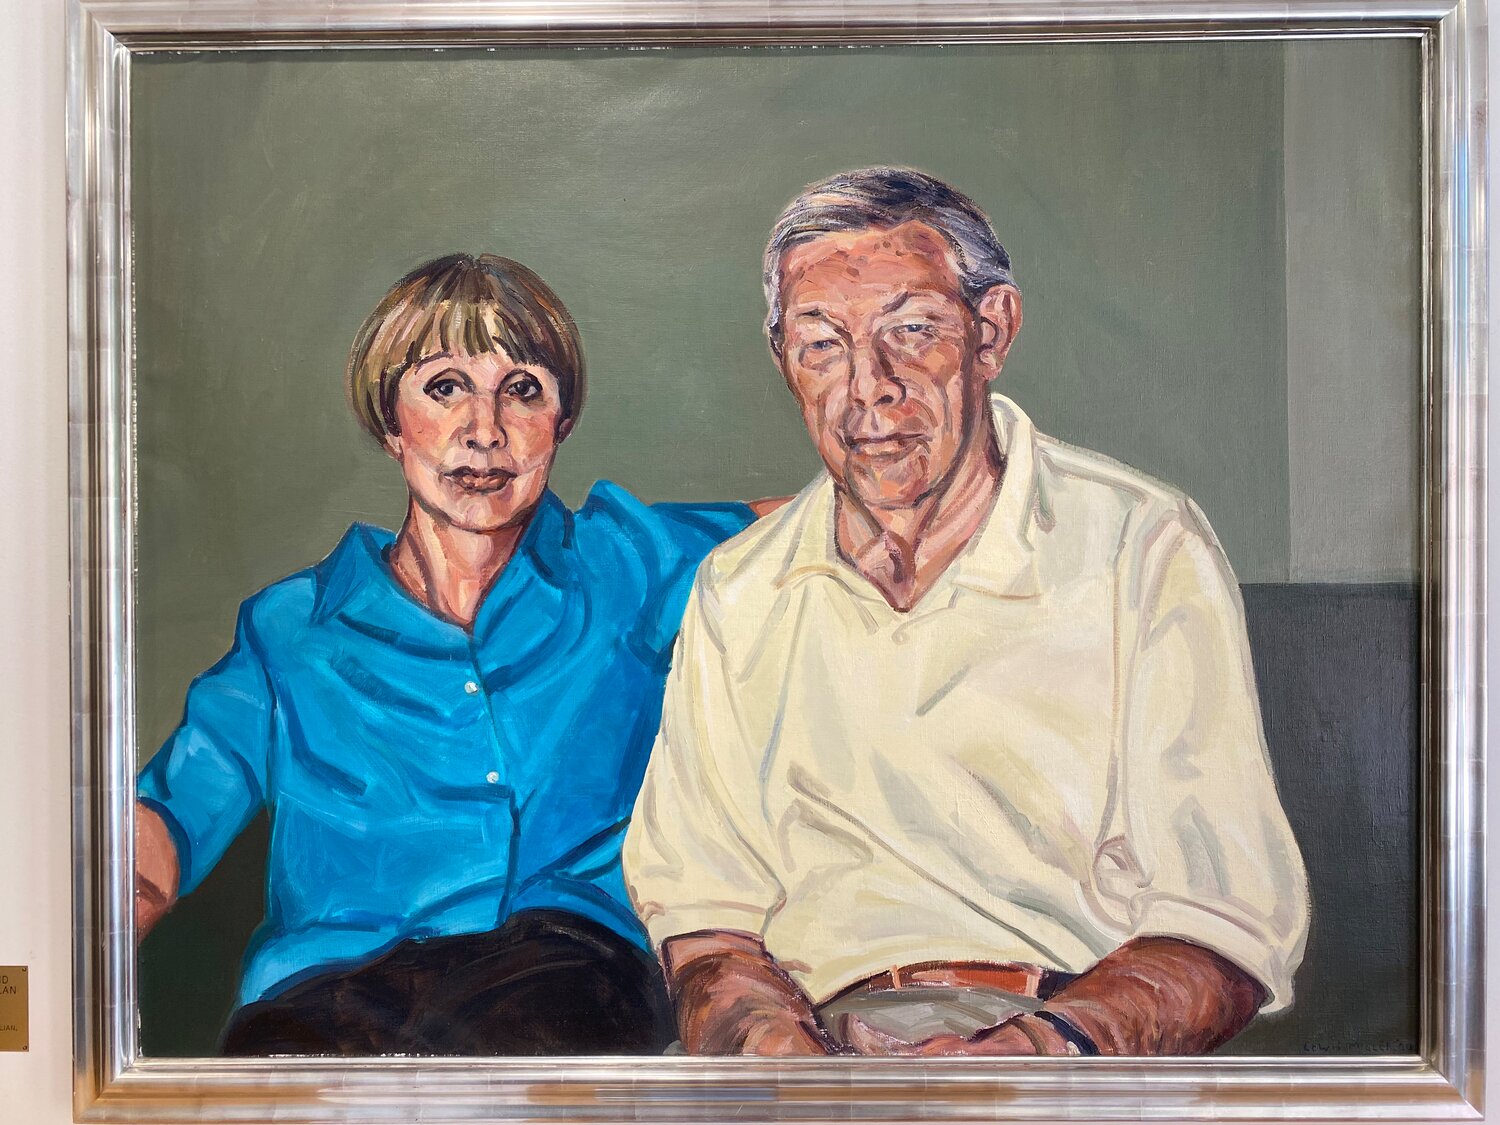 A portrait of Helen and Charles was painted by Australian artist Lewis Miller in 2000, which is in the Dolan DNA Learning Center at Cold Spring Harbor Laboratory.